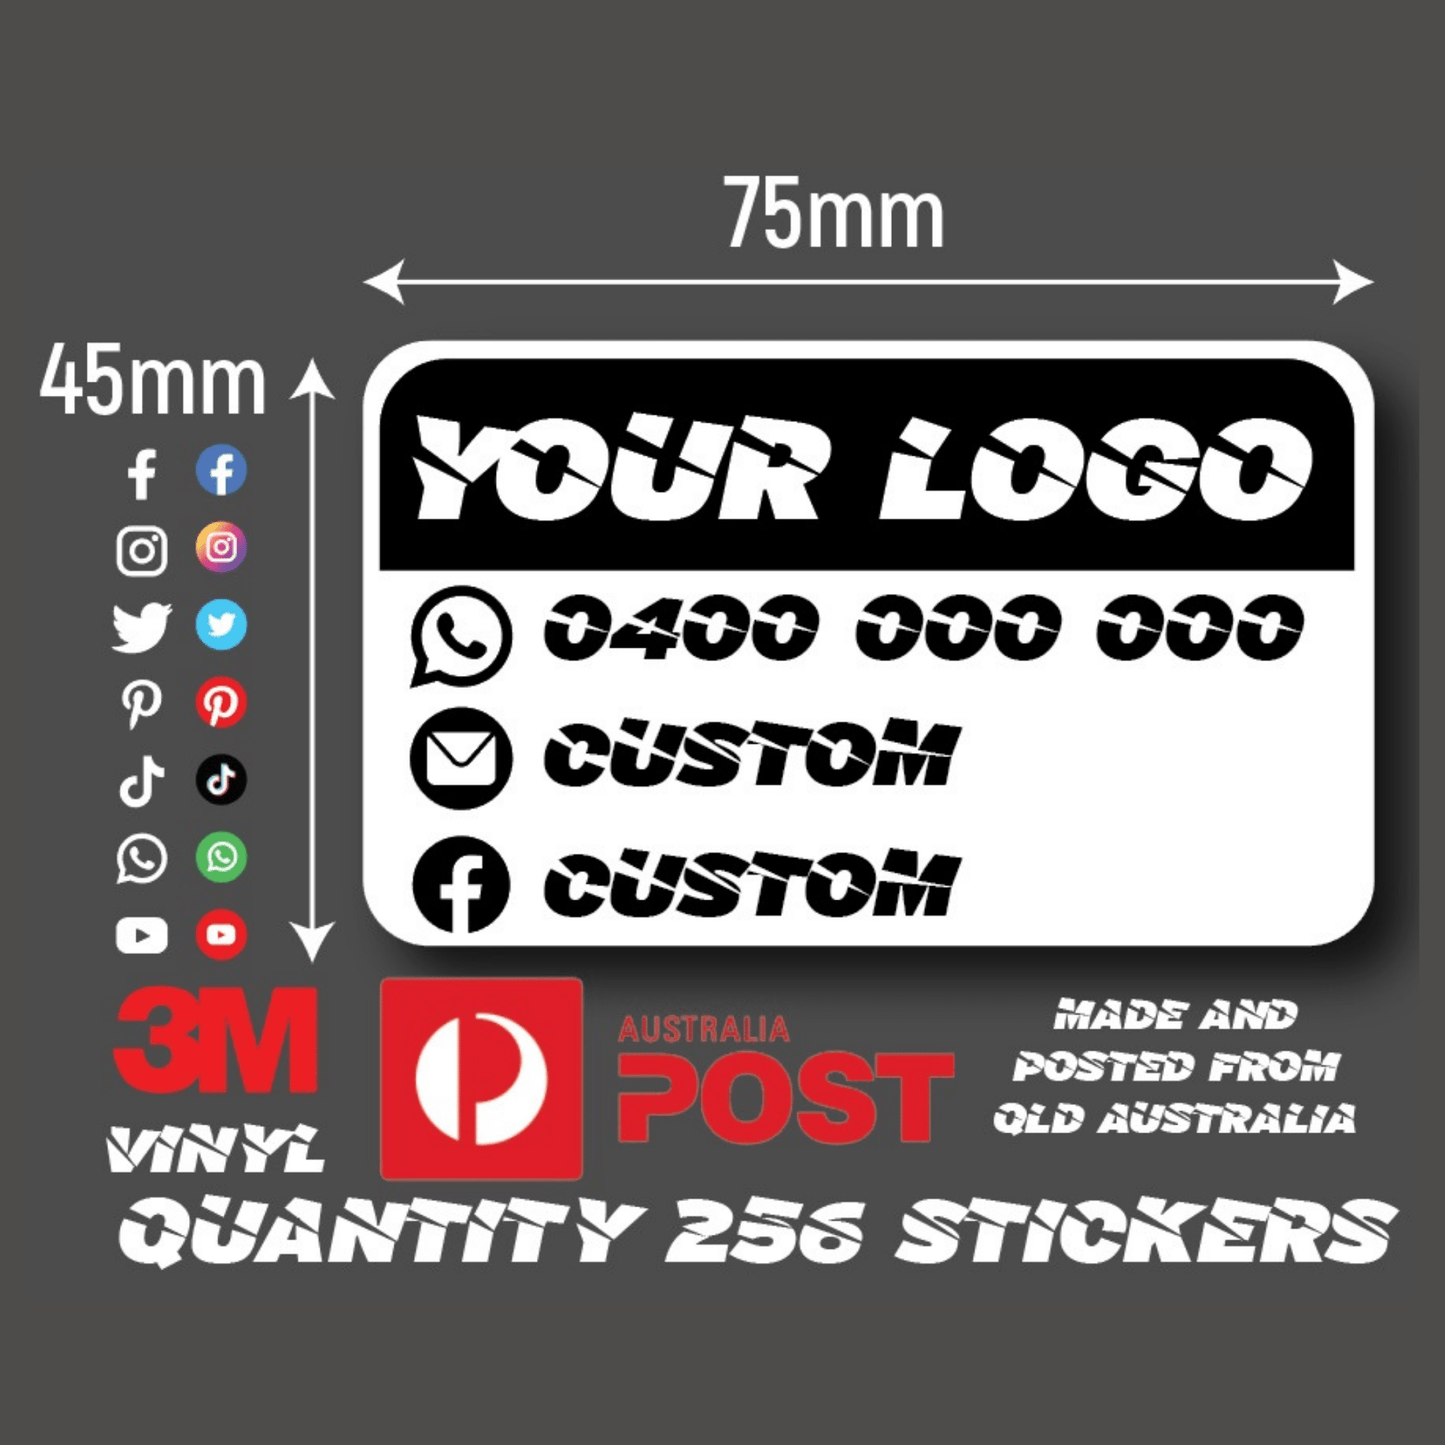 Electrician Customised Vinyl Stickers Each 75 x 45mm Total 256 Stickers